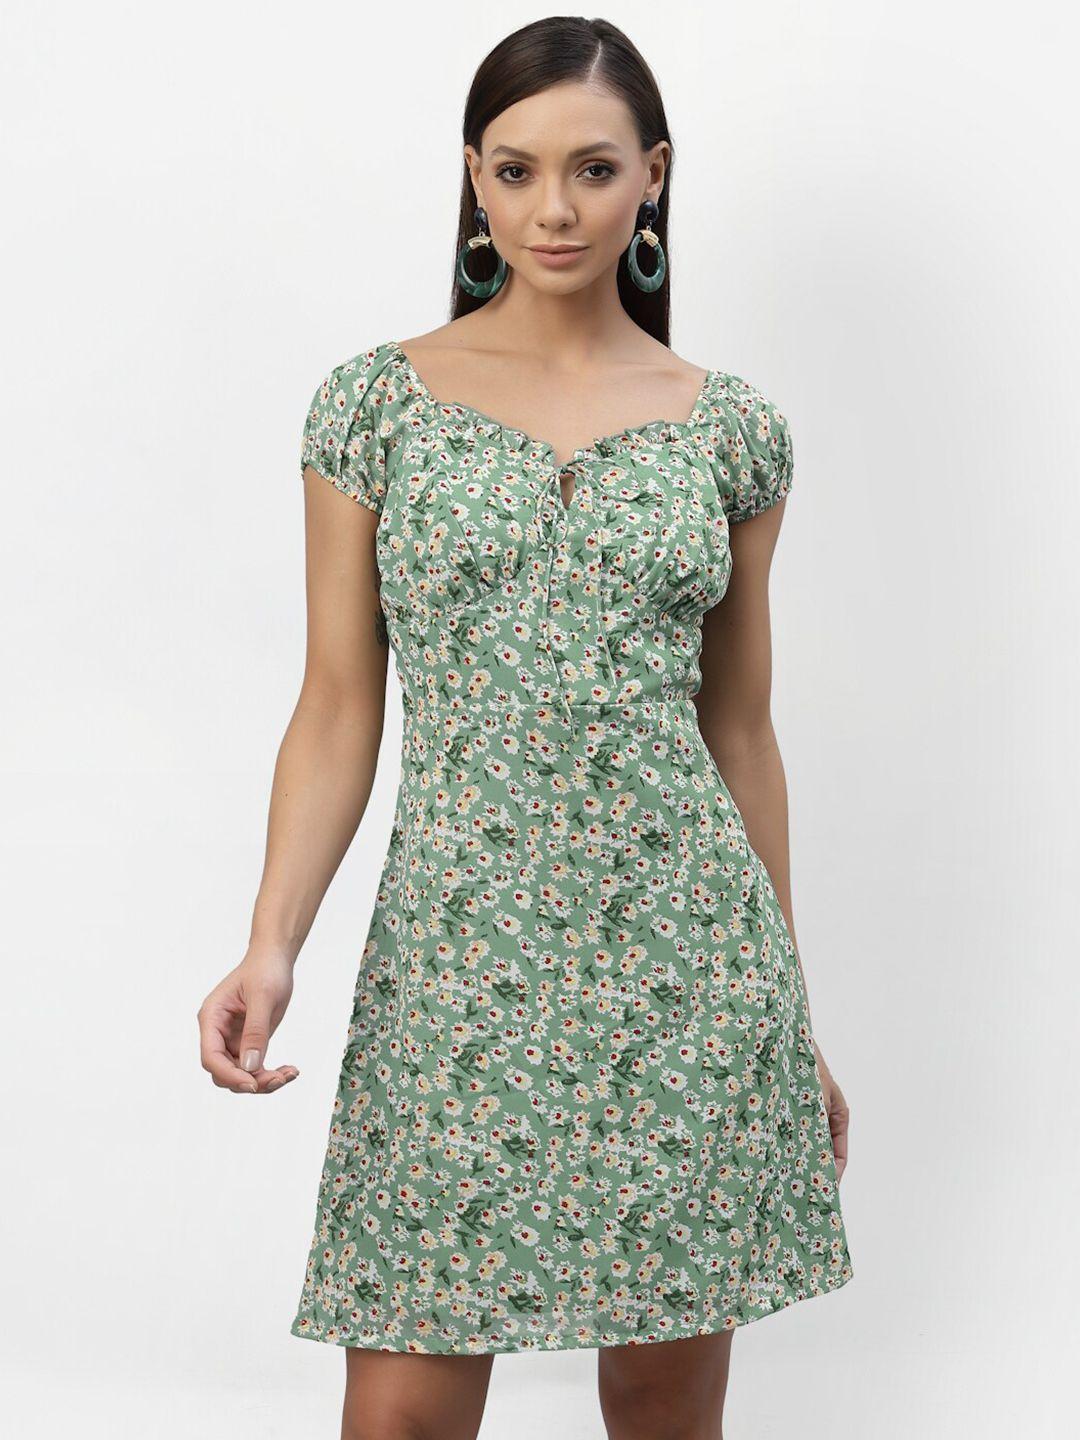 aayu women green & white floral tie-up neck crepe a-line dress